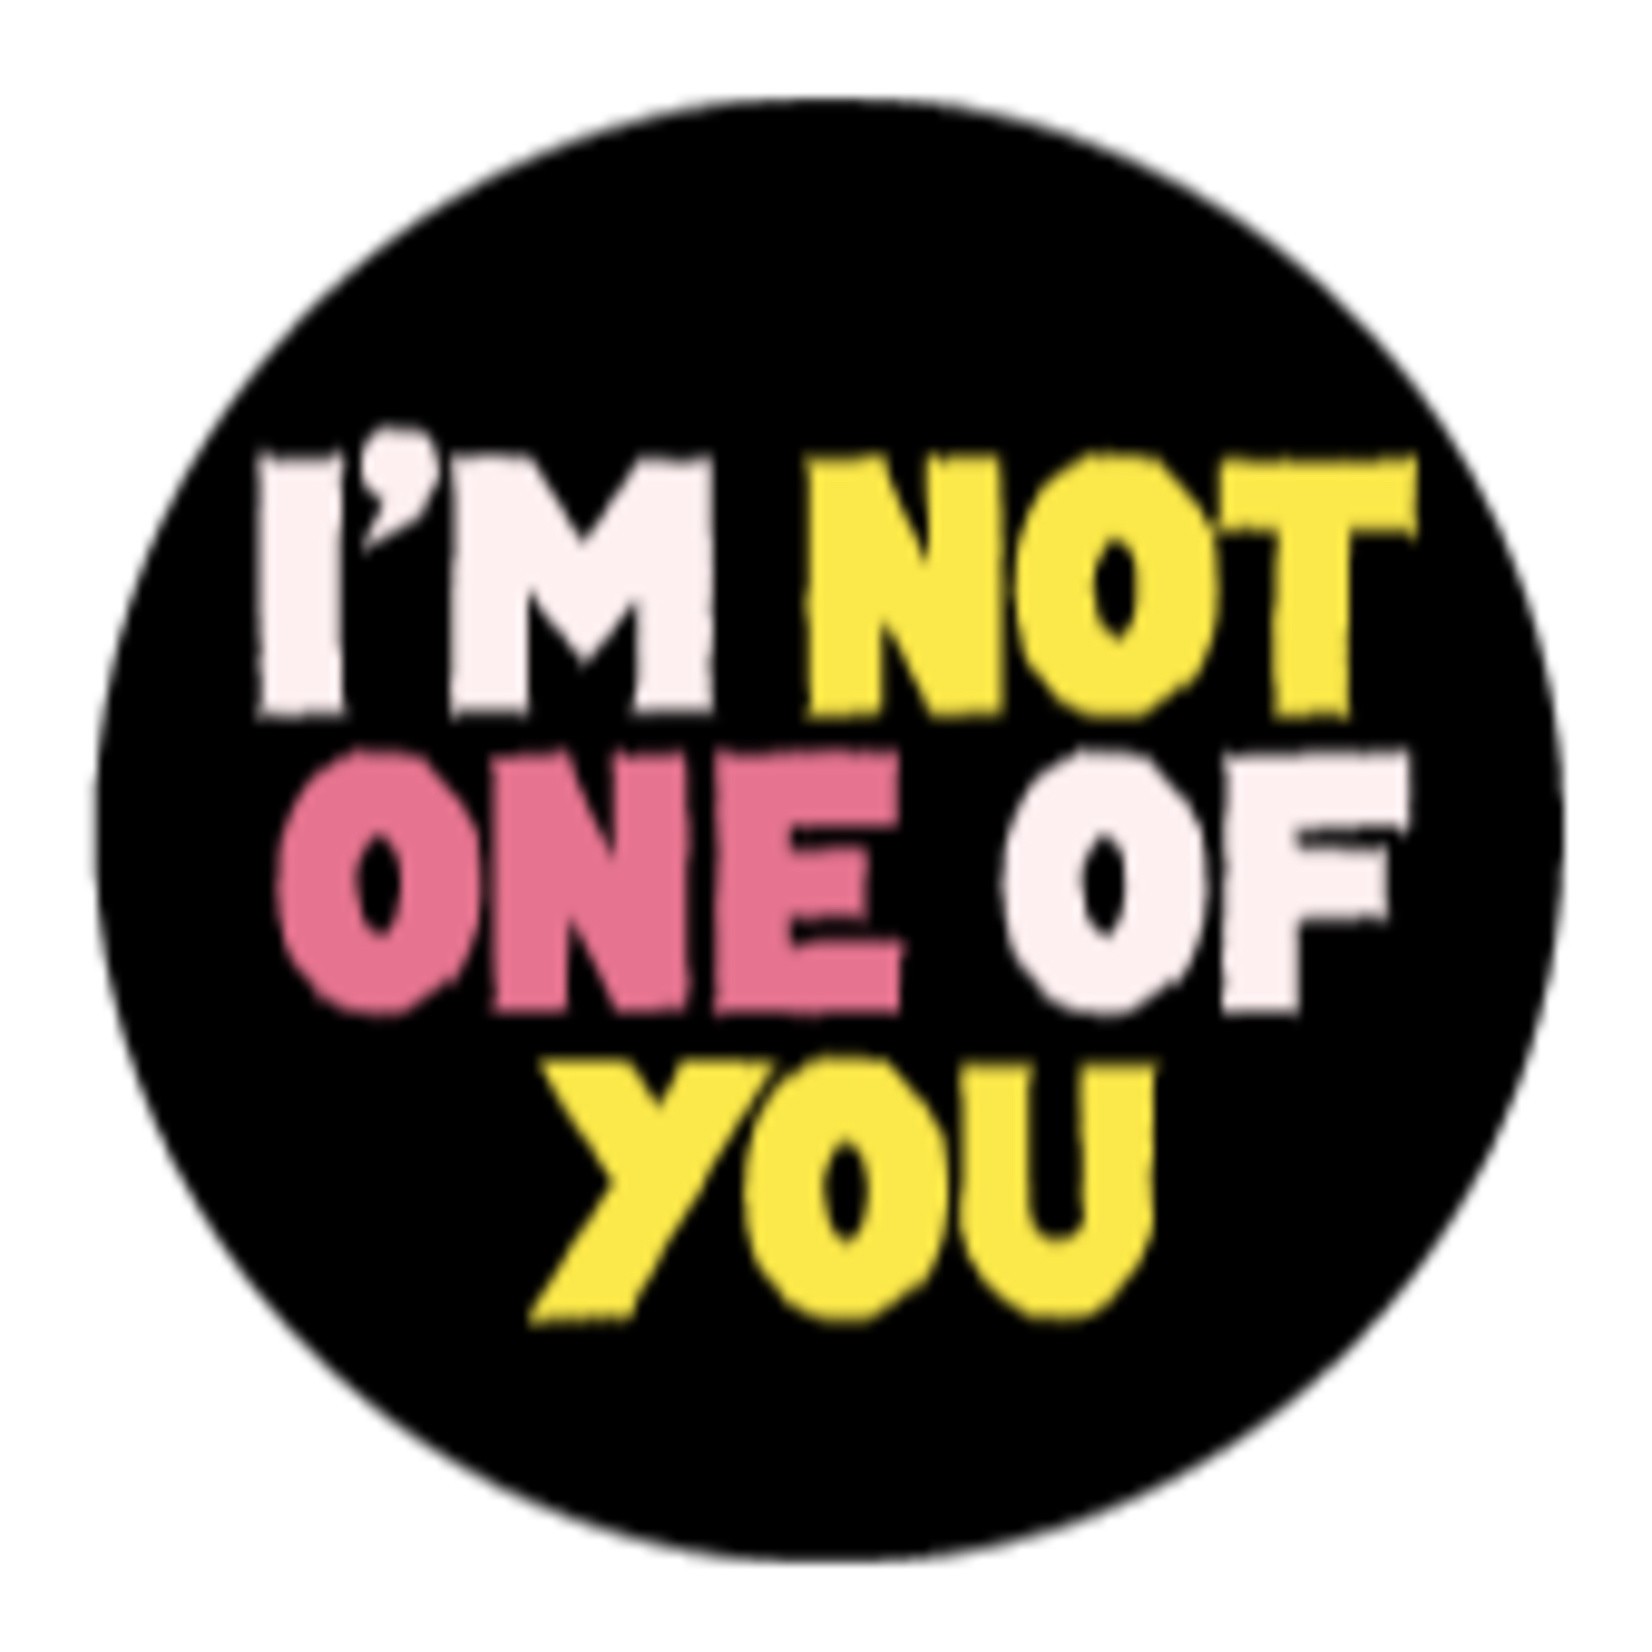 Sticker - I'm Not One Of You